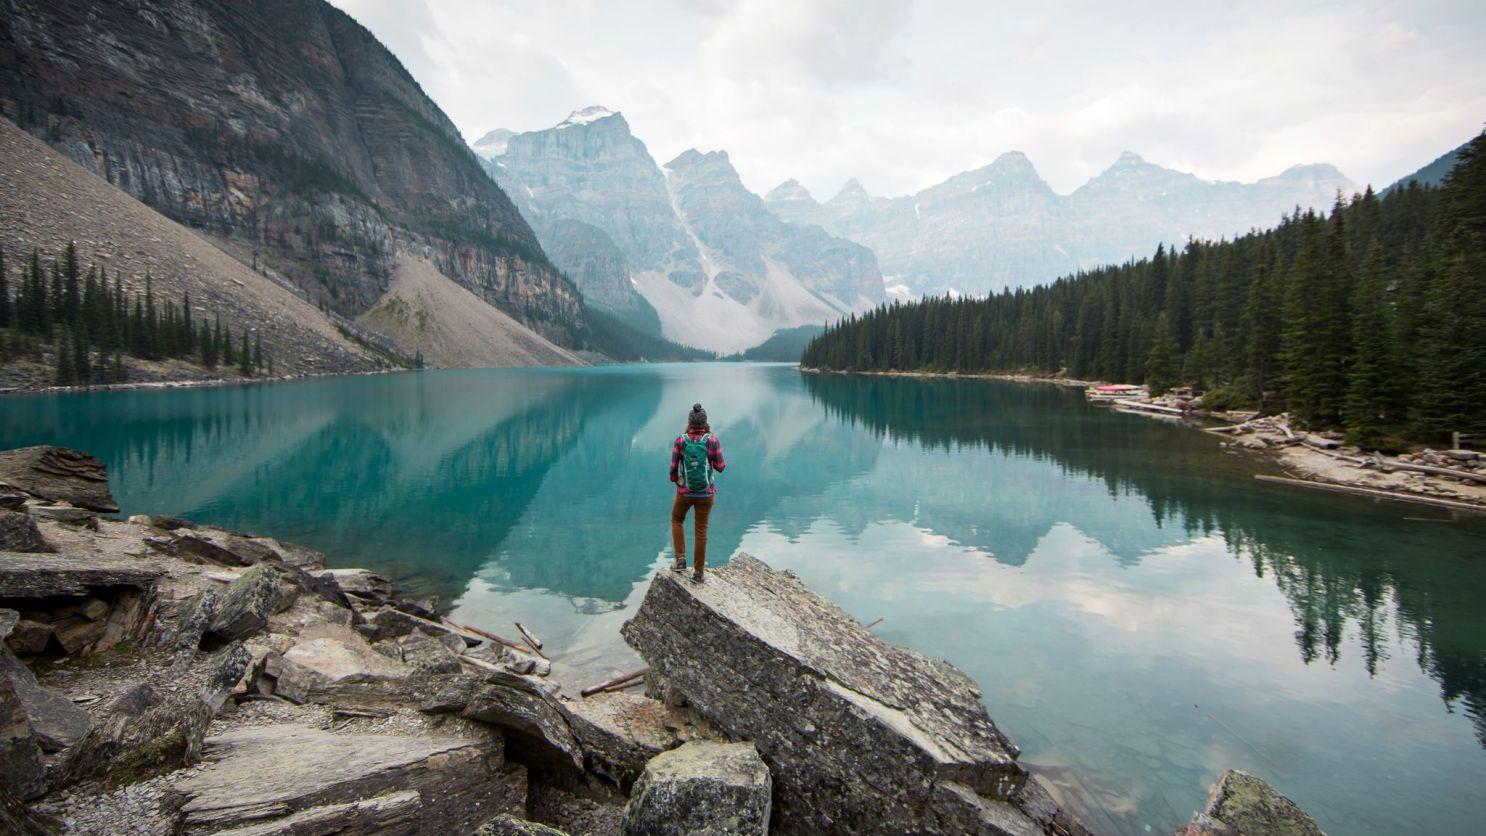 Spend 10 days exploring the Canadian Rockies, from Banff National